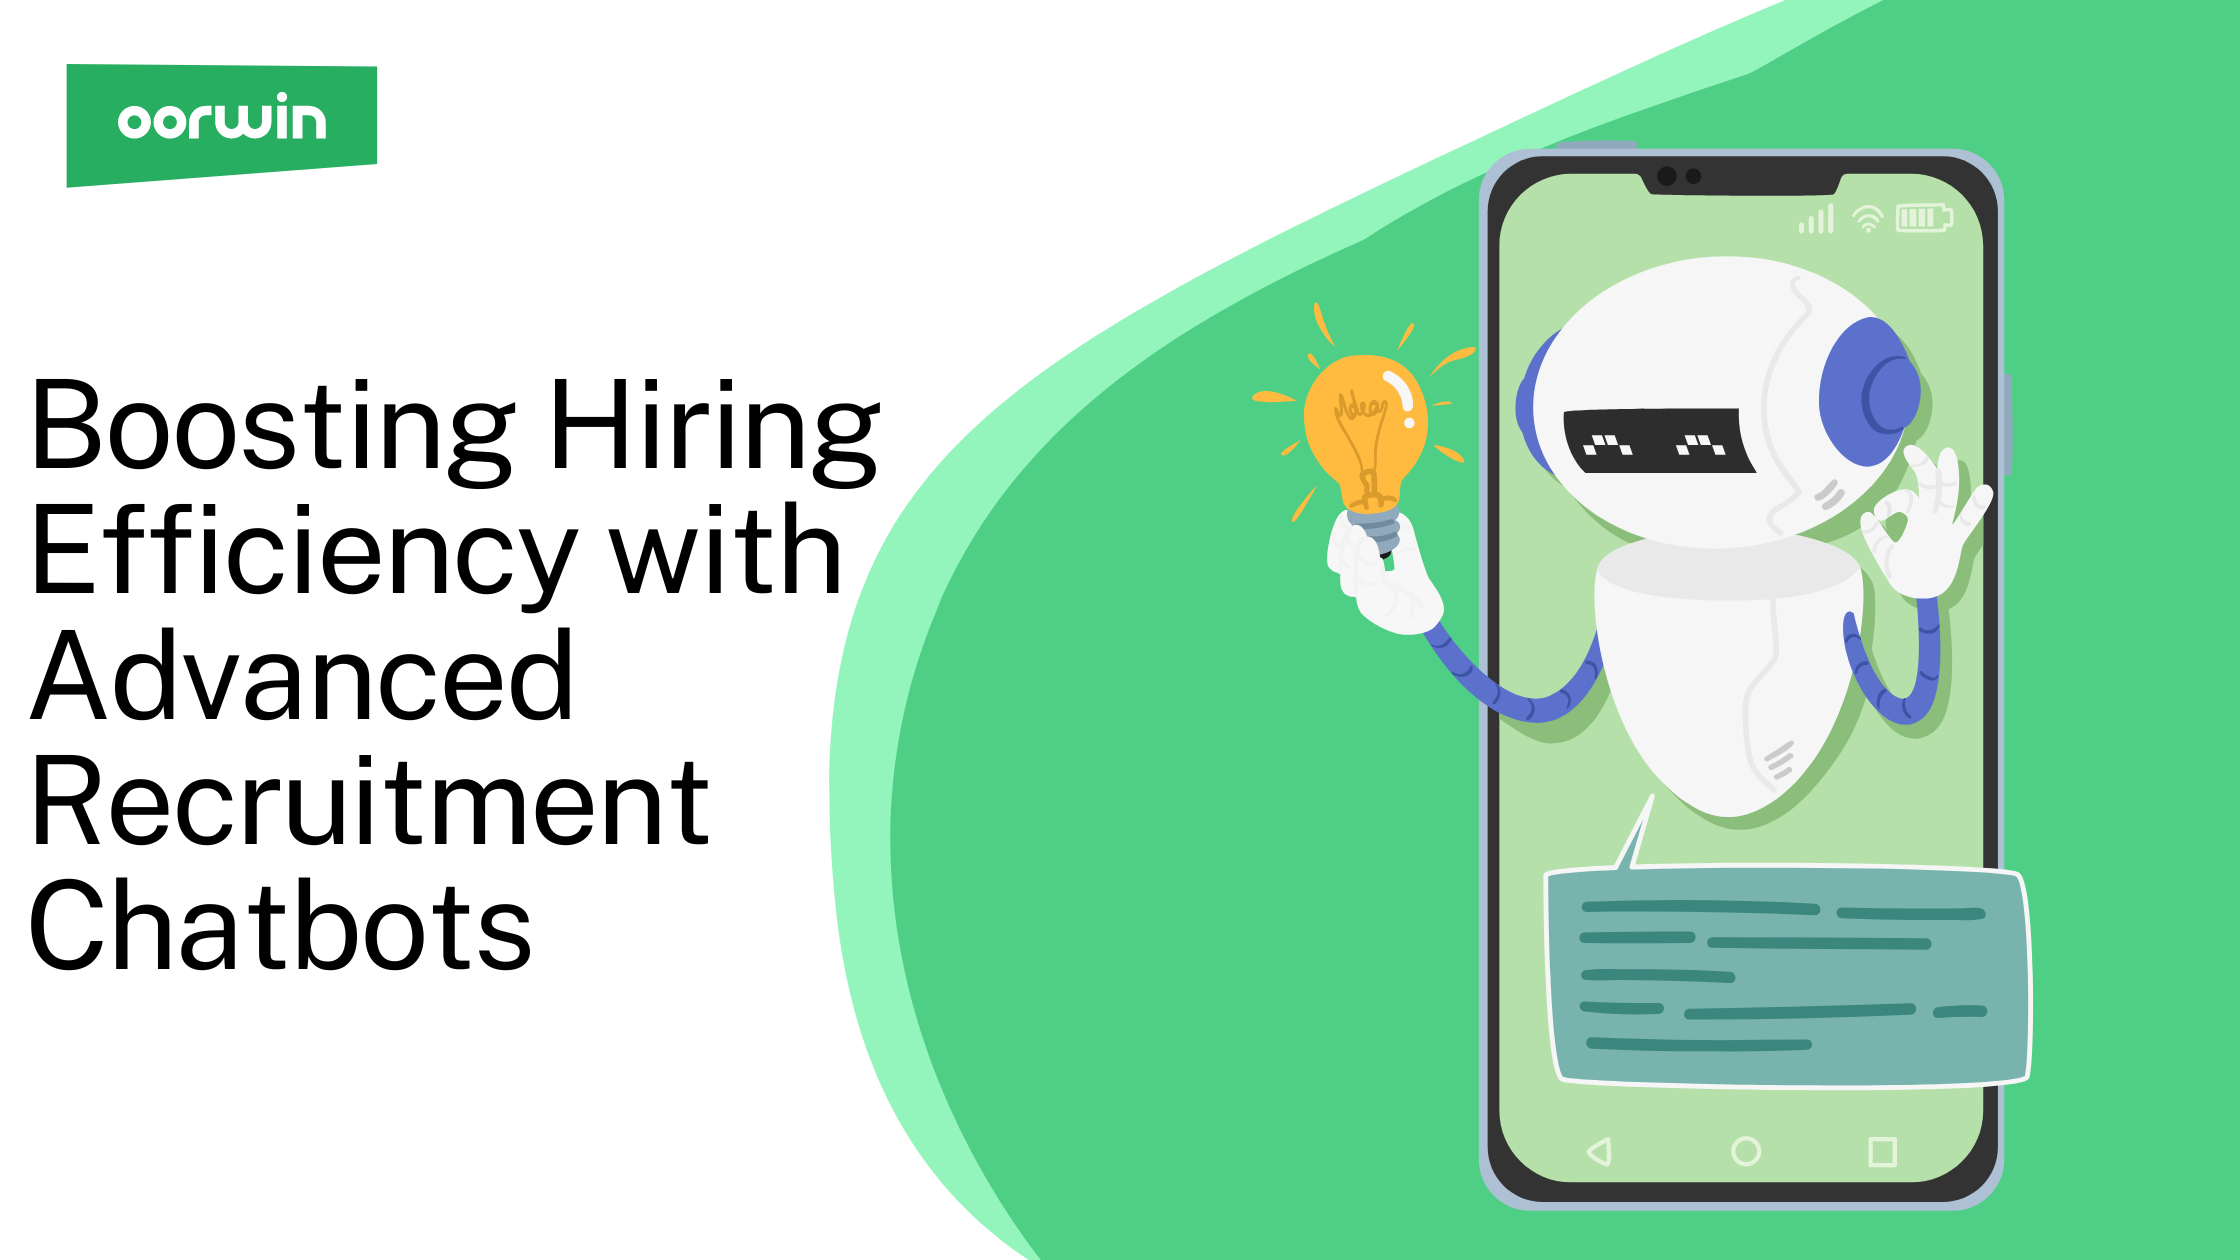 Boosting Hiring Efficiency with Advanced Recruitment Chatbots